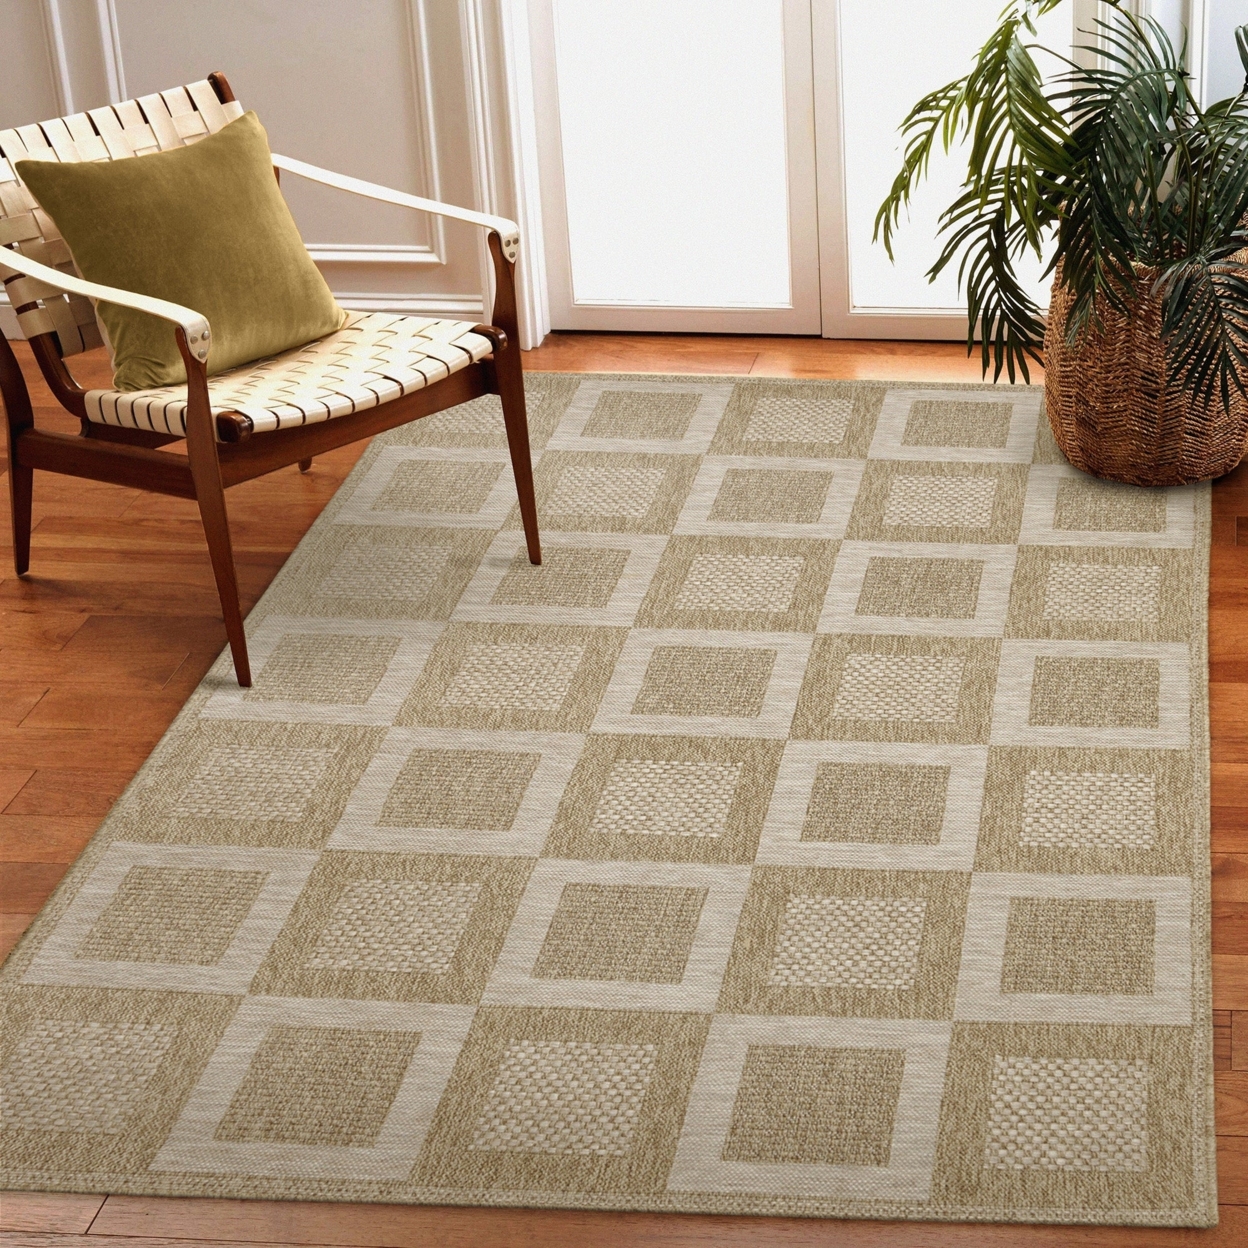 Liora Manne Orly Squares Indoor Outdoor Area Rug Natural - 7'10 X 9'10